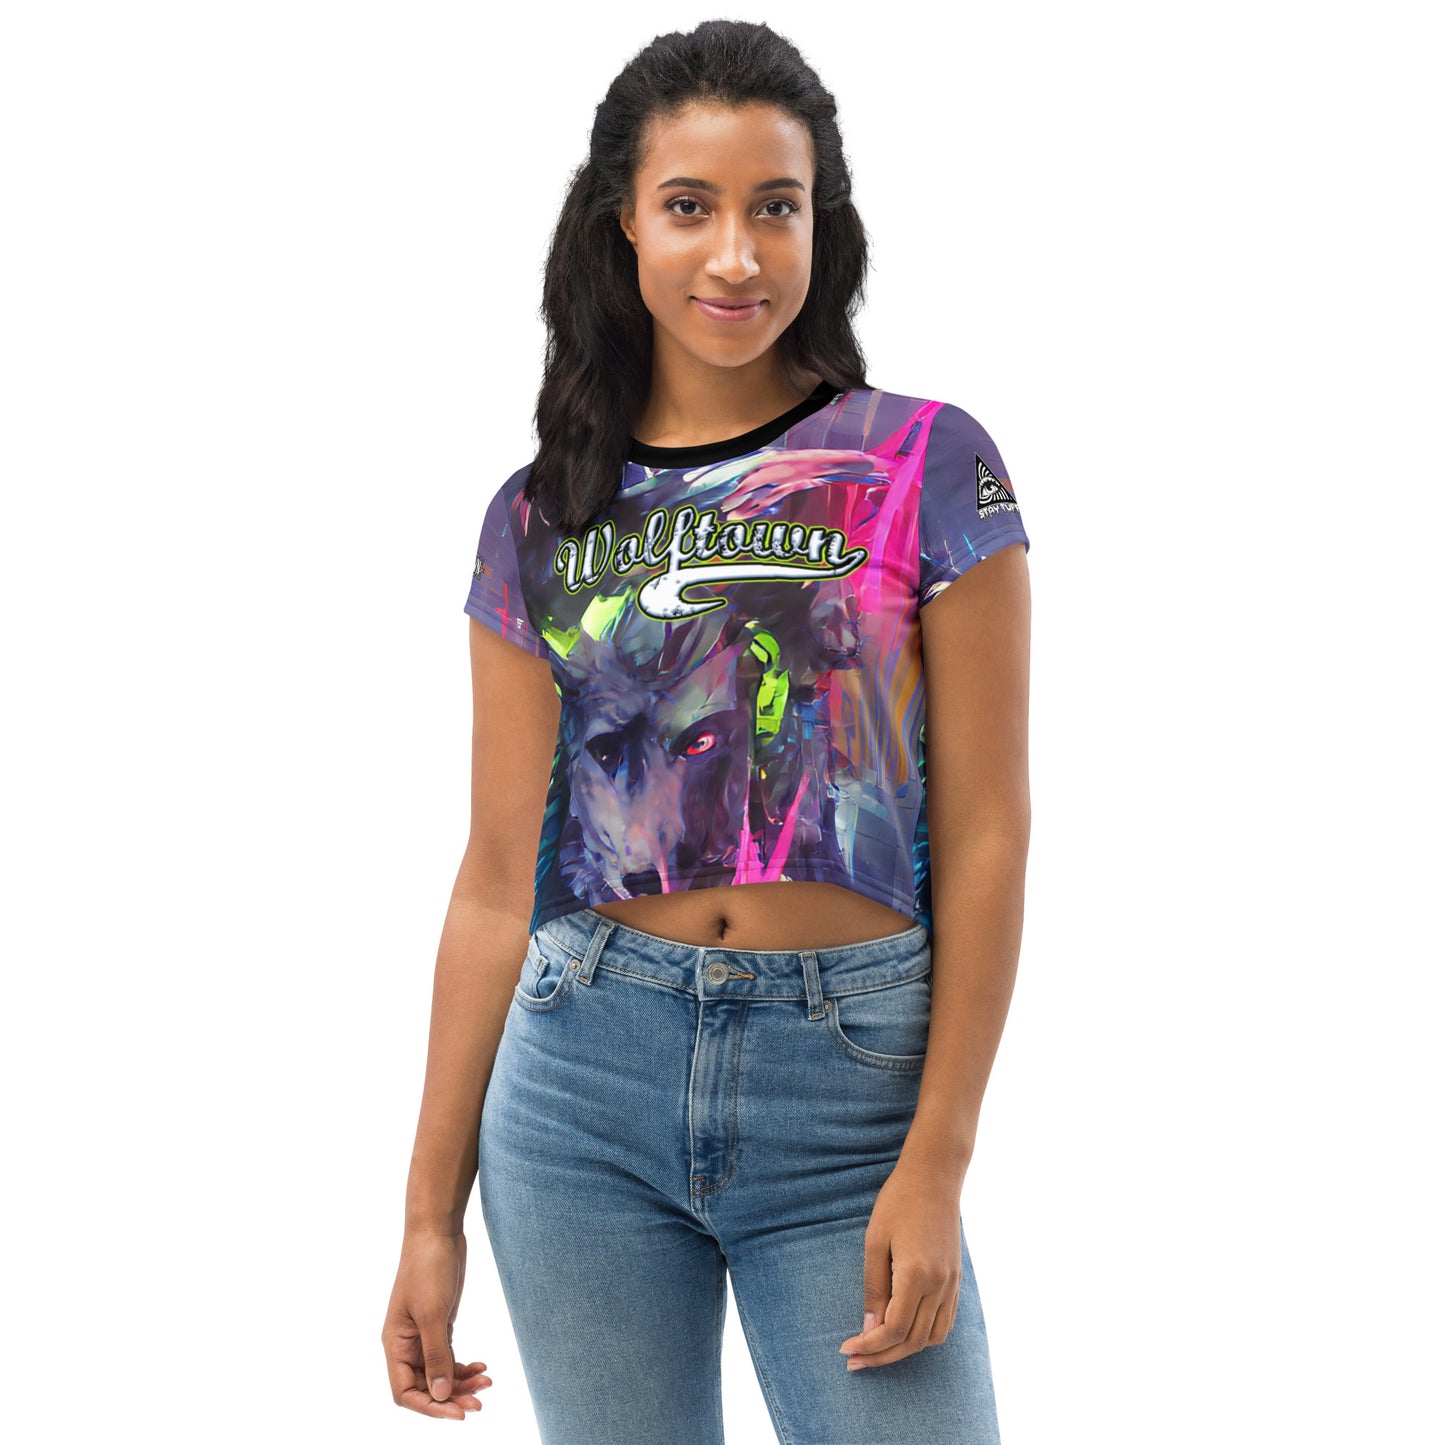 WOLFTOWN 'ANXIETY' (All-Over Print Crop Top)